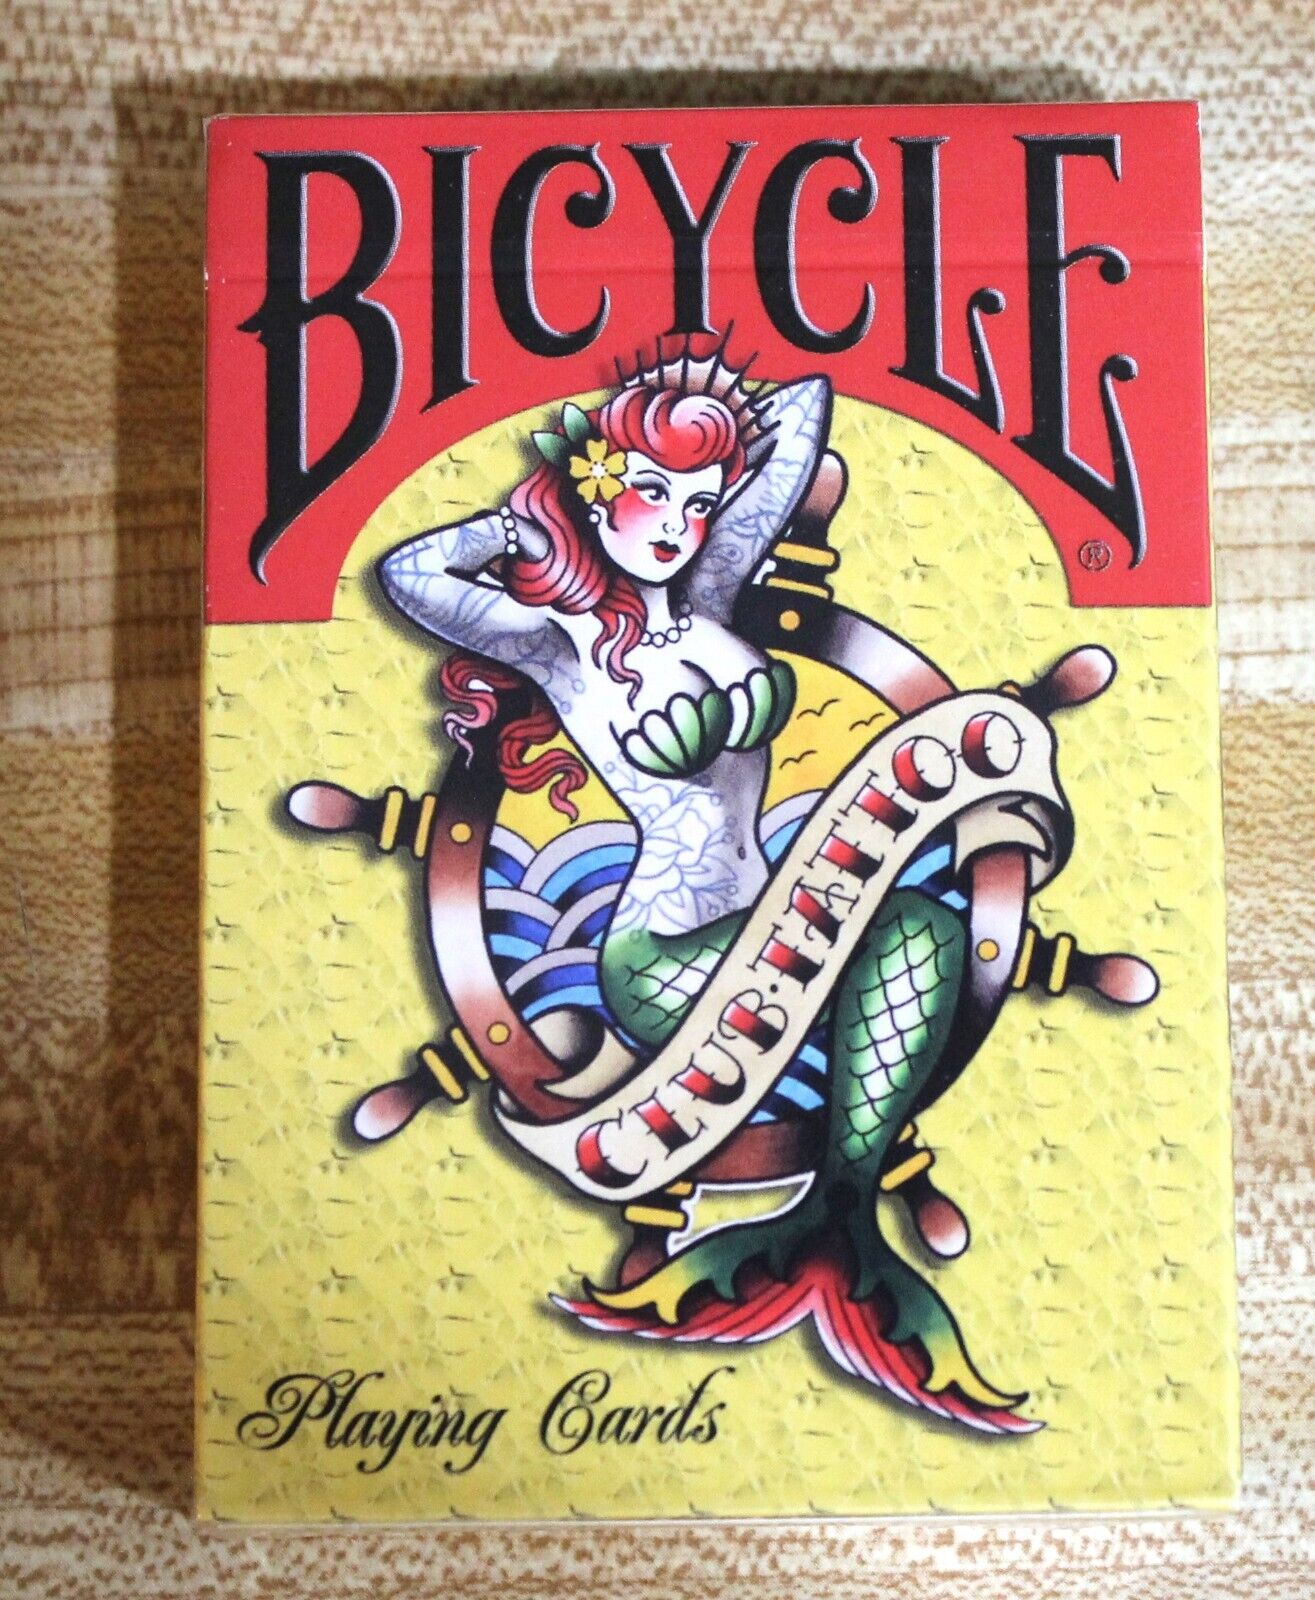 Bicycle Mermaid Club Tattoo Limited Edition Playing Cards RARE Sealed Mint Deck